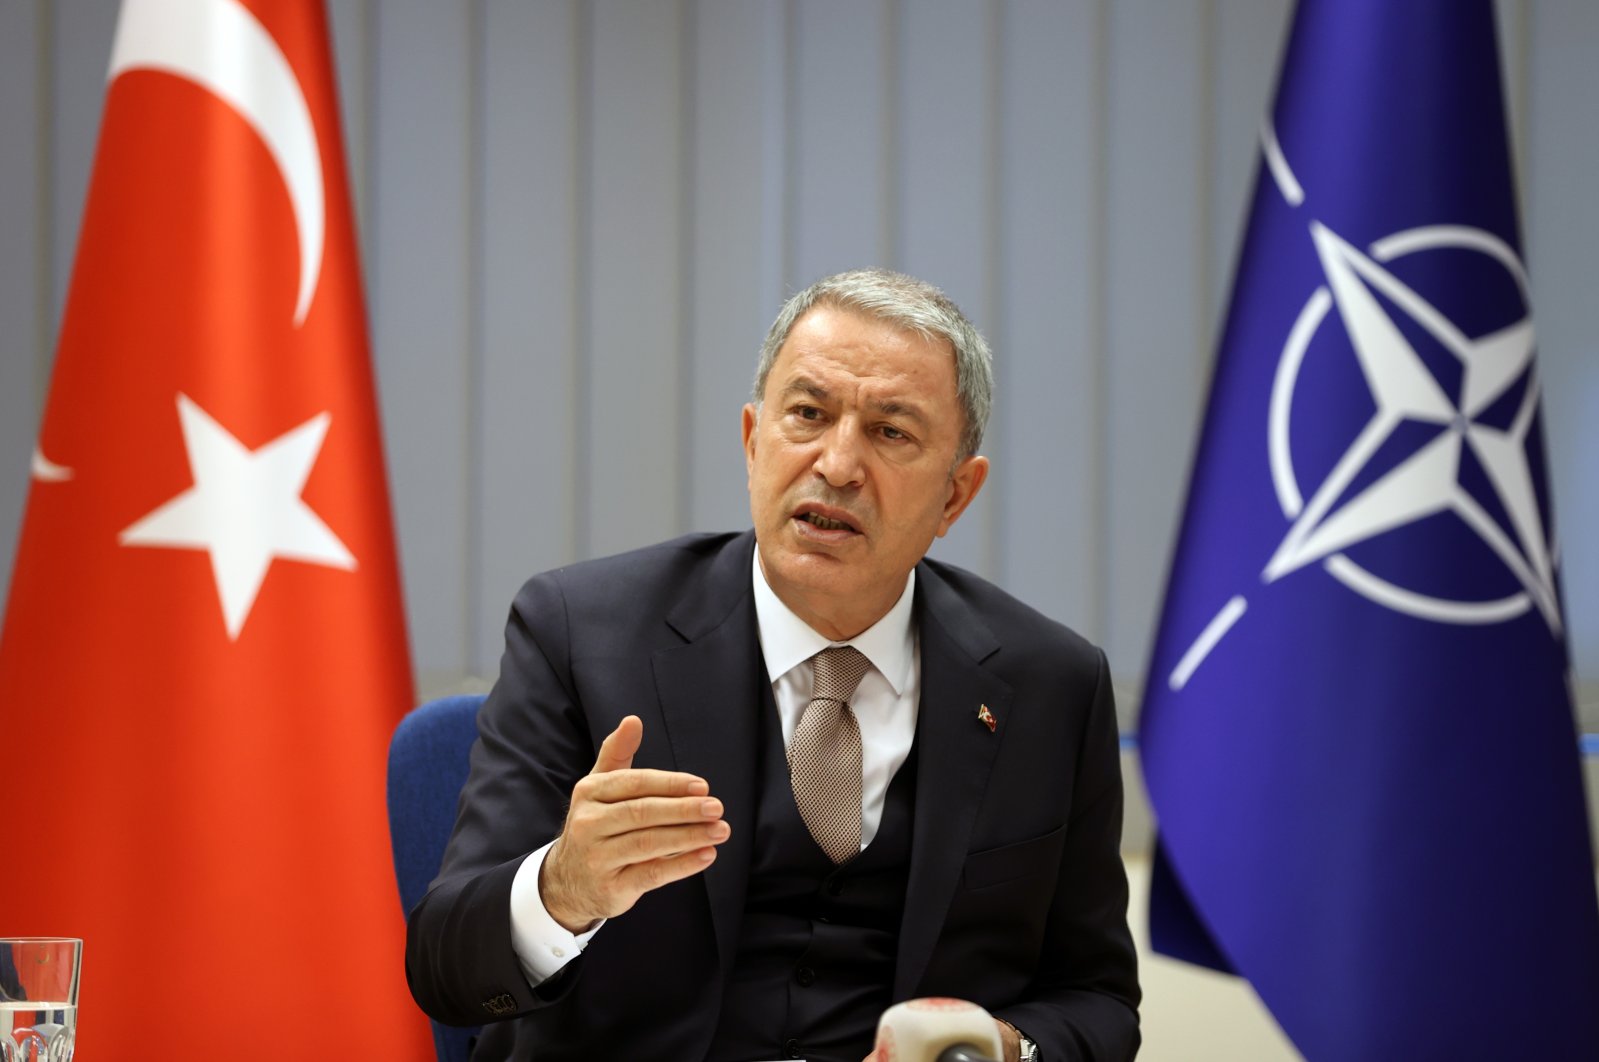 Defense Minister Hulusi Akar is talking to reporters after a NATO meeting in Brussels, Belgium, Feb. 18, 2022. (AA Photo)